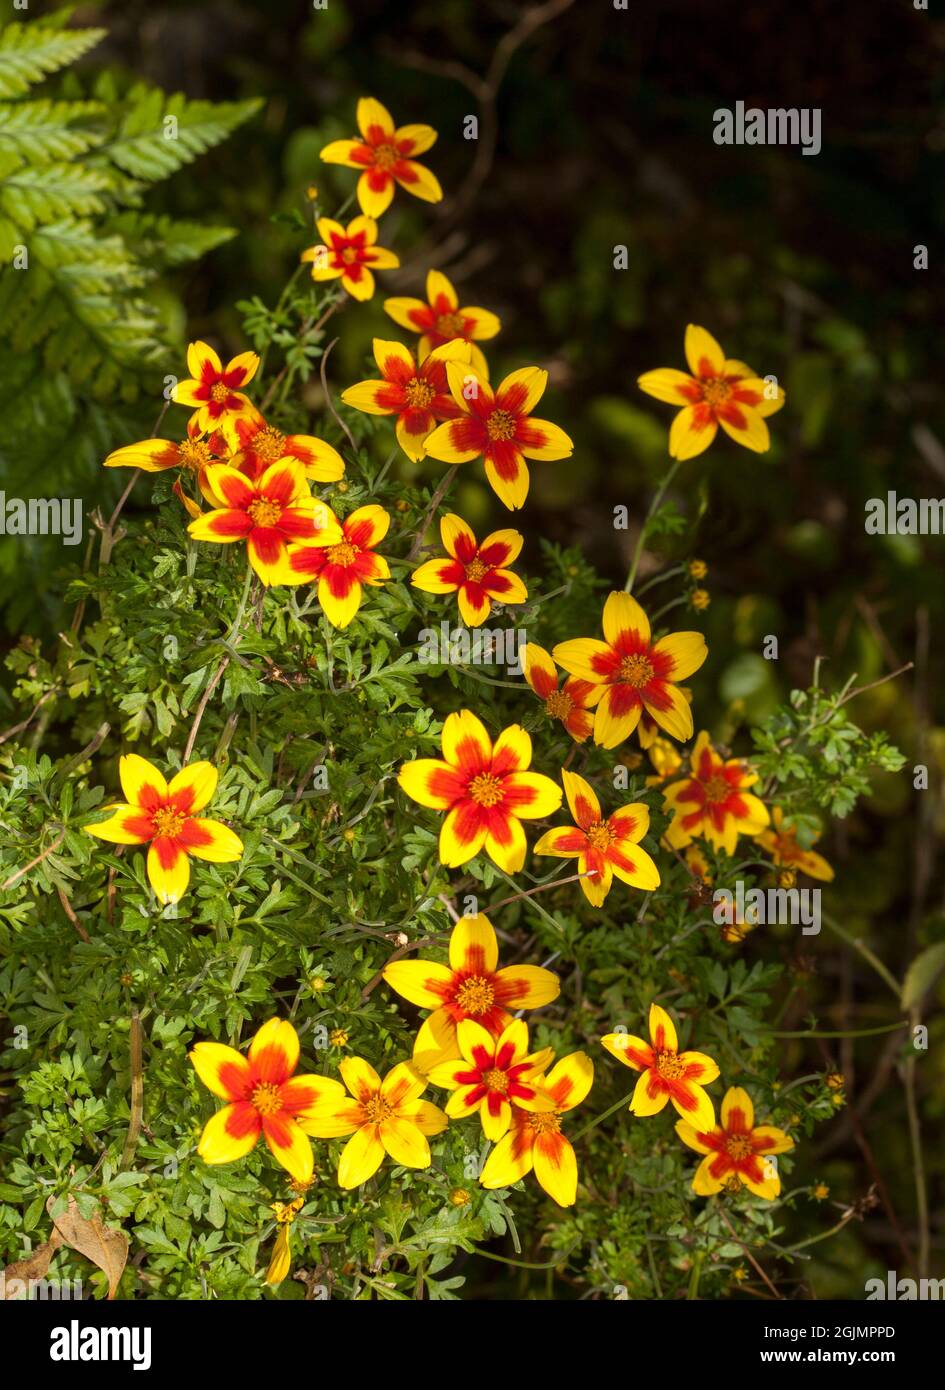 Vivid red and yellow flowers of Bidens ferulifolia 'Red Eye', Beggarticks, against background of emerald green foliage, in Australia Stock Photo